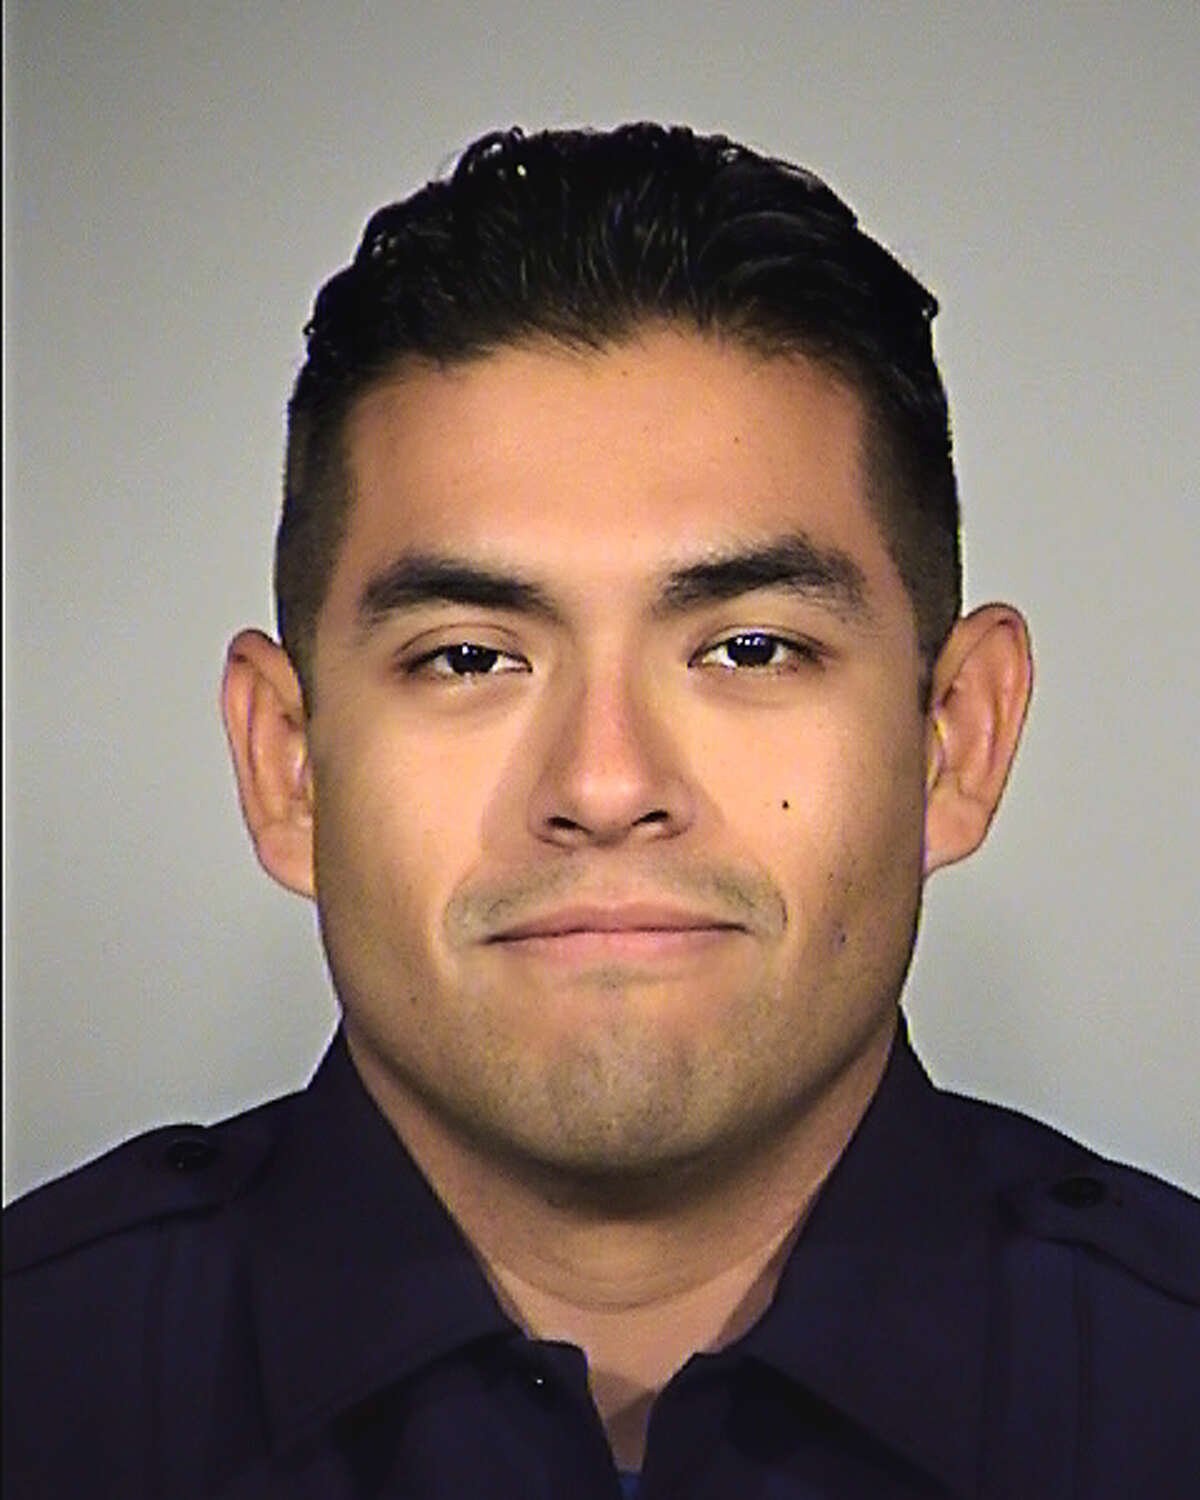 Officer Miguel Moreno was pronounced dead at 11:11 a.m. Friday, June 30, 2017, after being involved in a shooting Thursday, June 29, 2017 just north of downtown San Antonio.